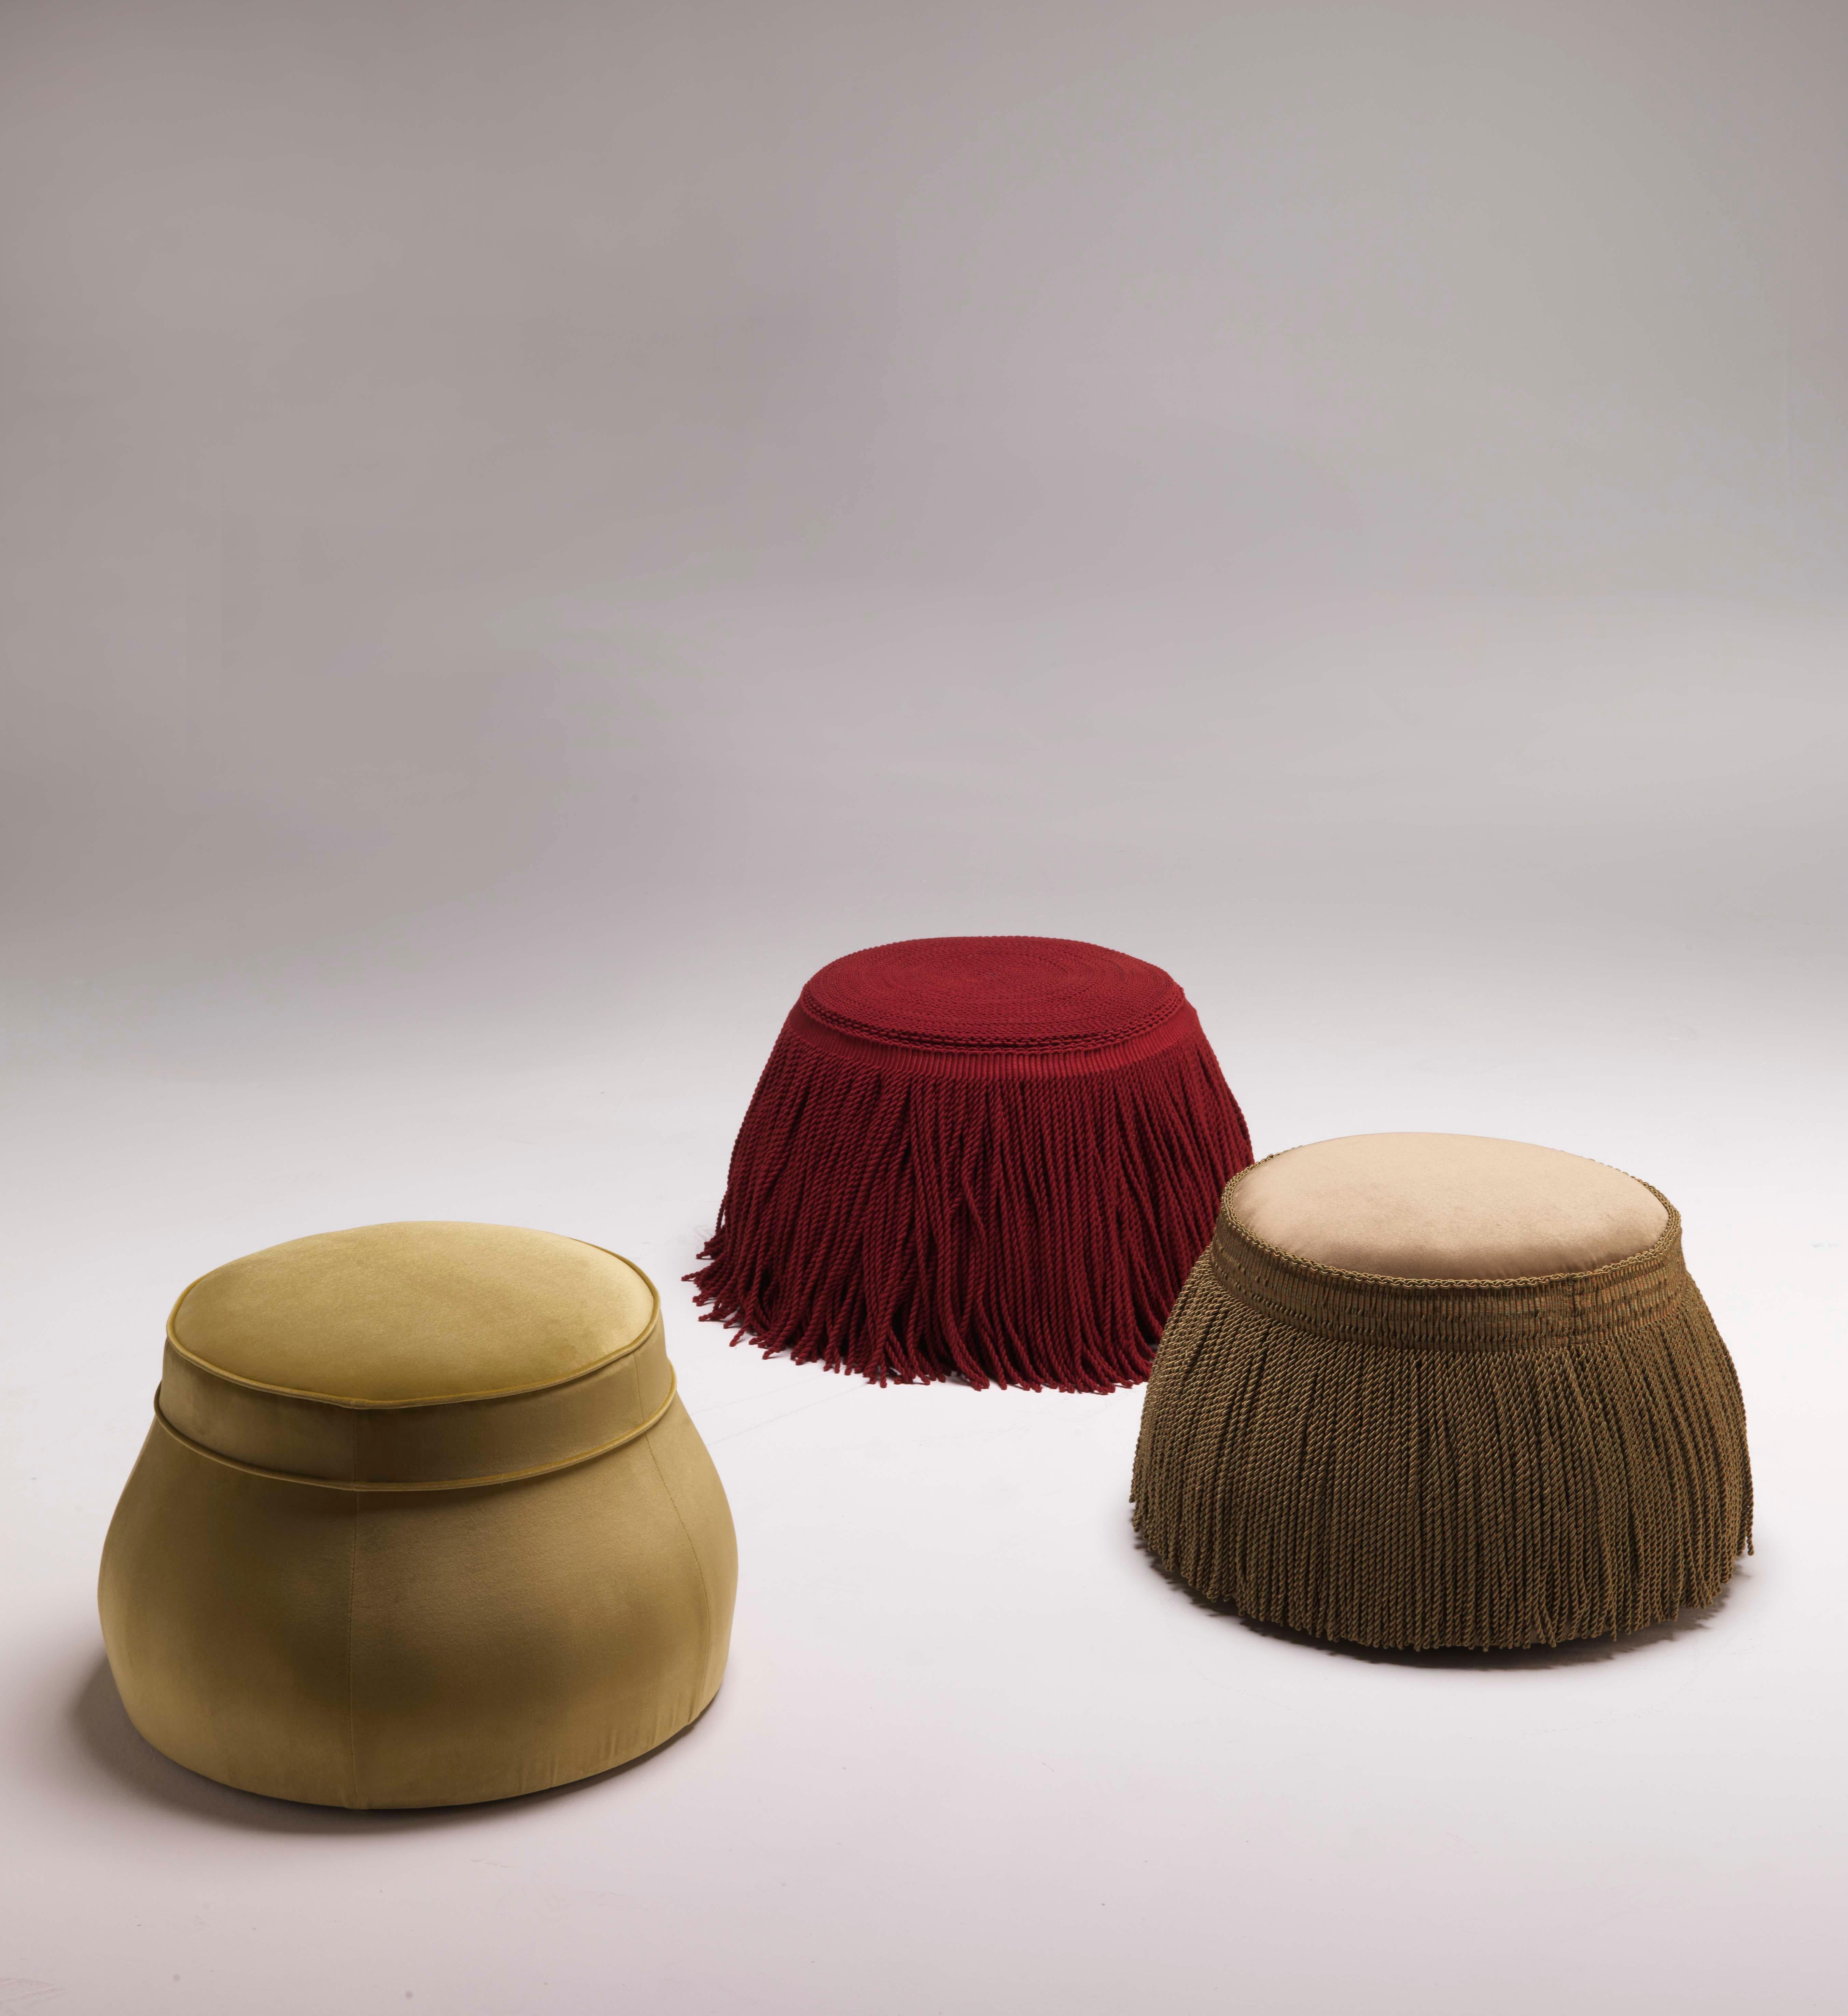 Elevate your space with the Kir Royal Footstool, a delightful creation by designer Christophe de la Fontaine. This footstool showcases an intriguing blend of irony and opulence, characterized by its lavish trimming and fringe. With a wooden